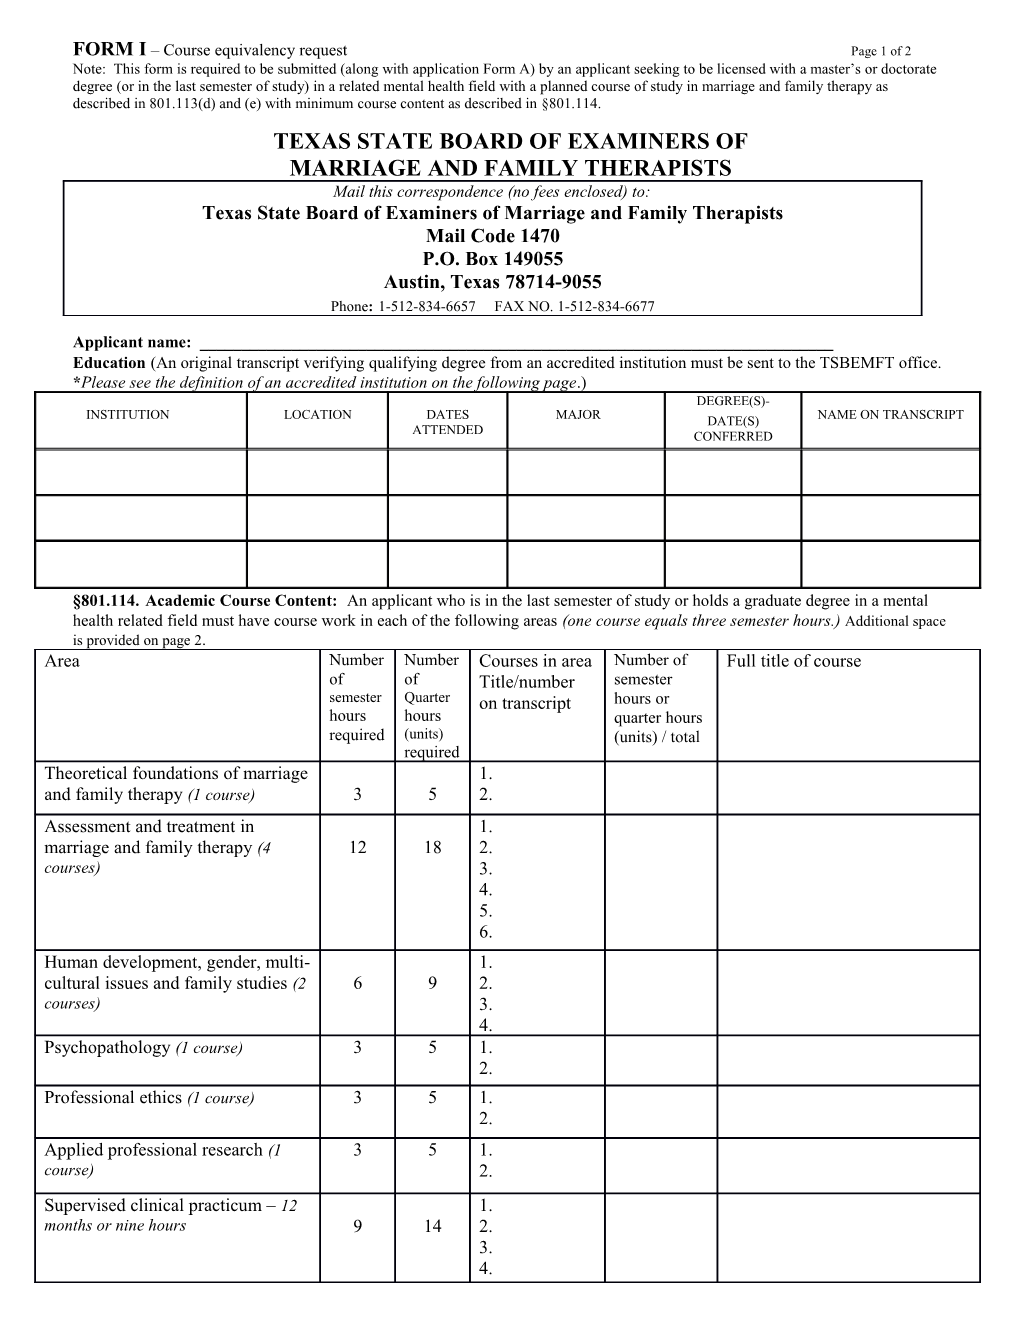 FORM I Course Equivalency Request Page 1 of 2